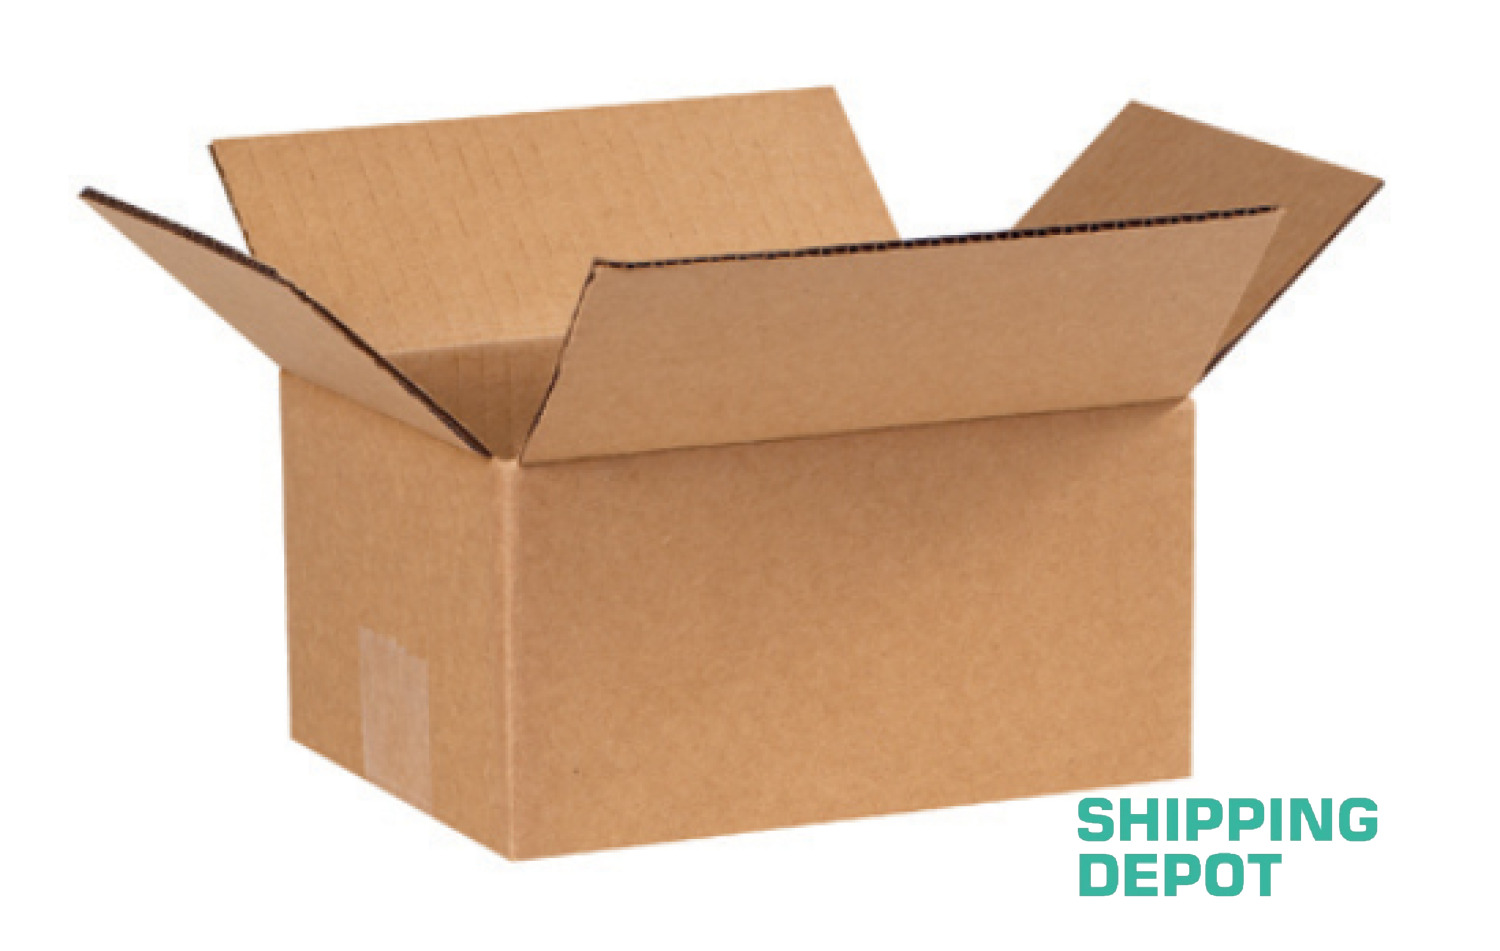 Shipping Boxes ~ Many Sizes Available Mailing Moving Packing Storage Small Big